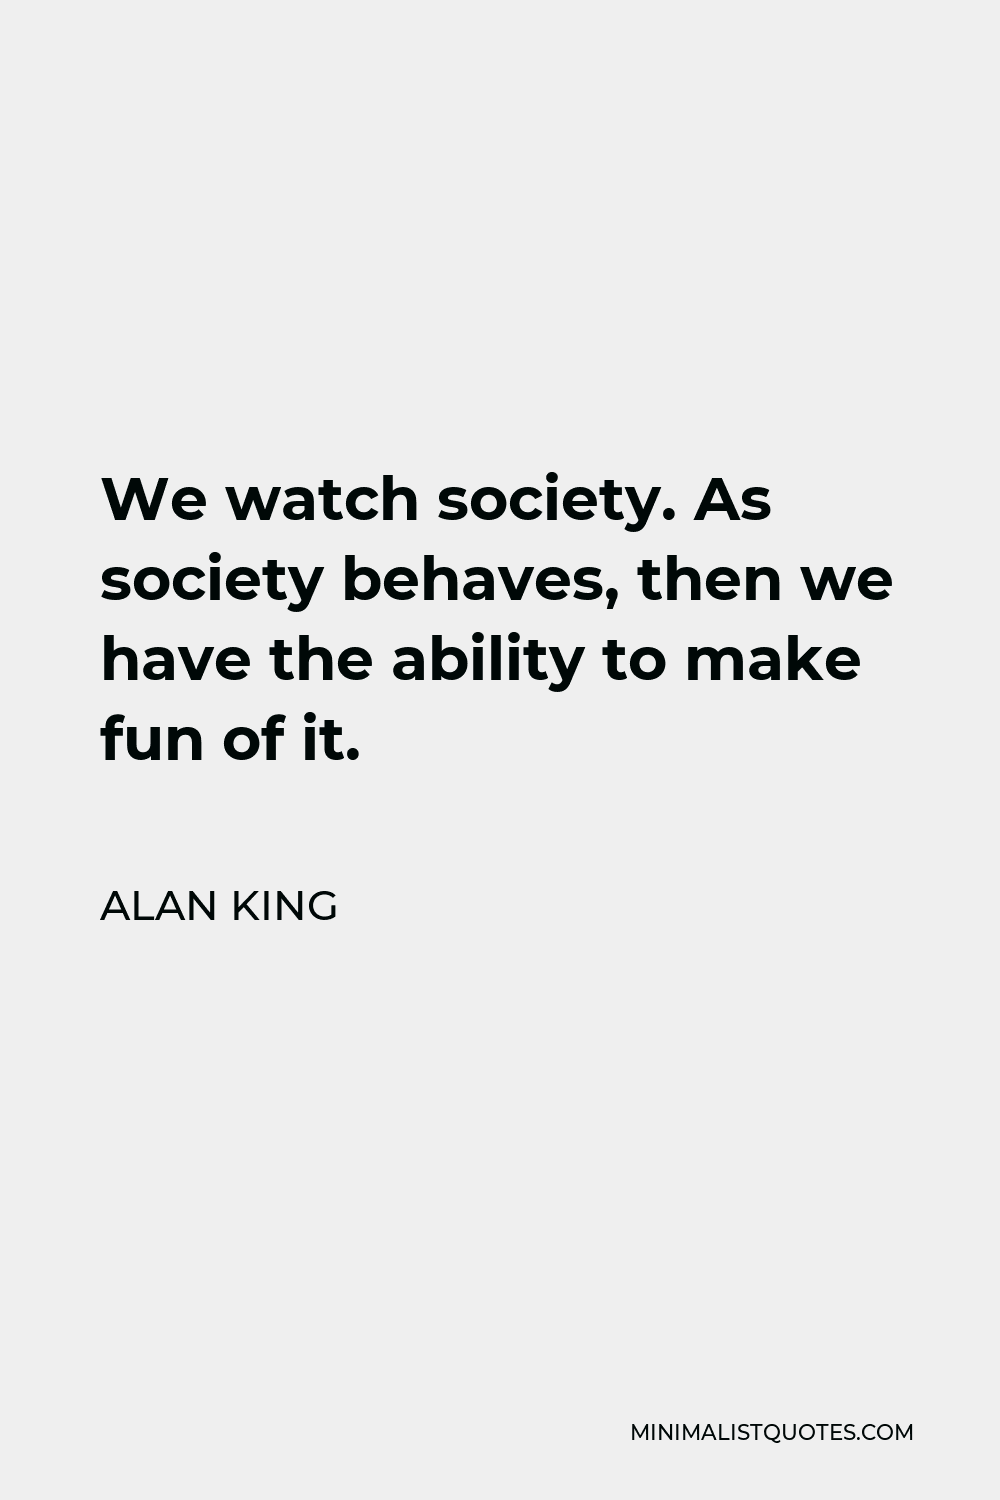 Alan King Quote - We watch society. As society behaves, then we have the ability to make fun of it.